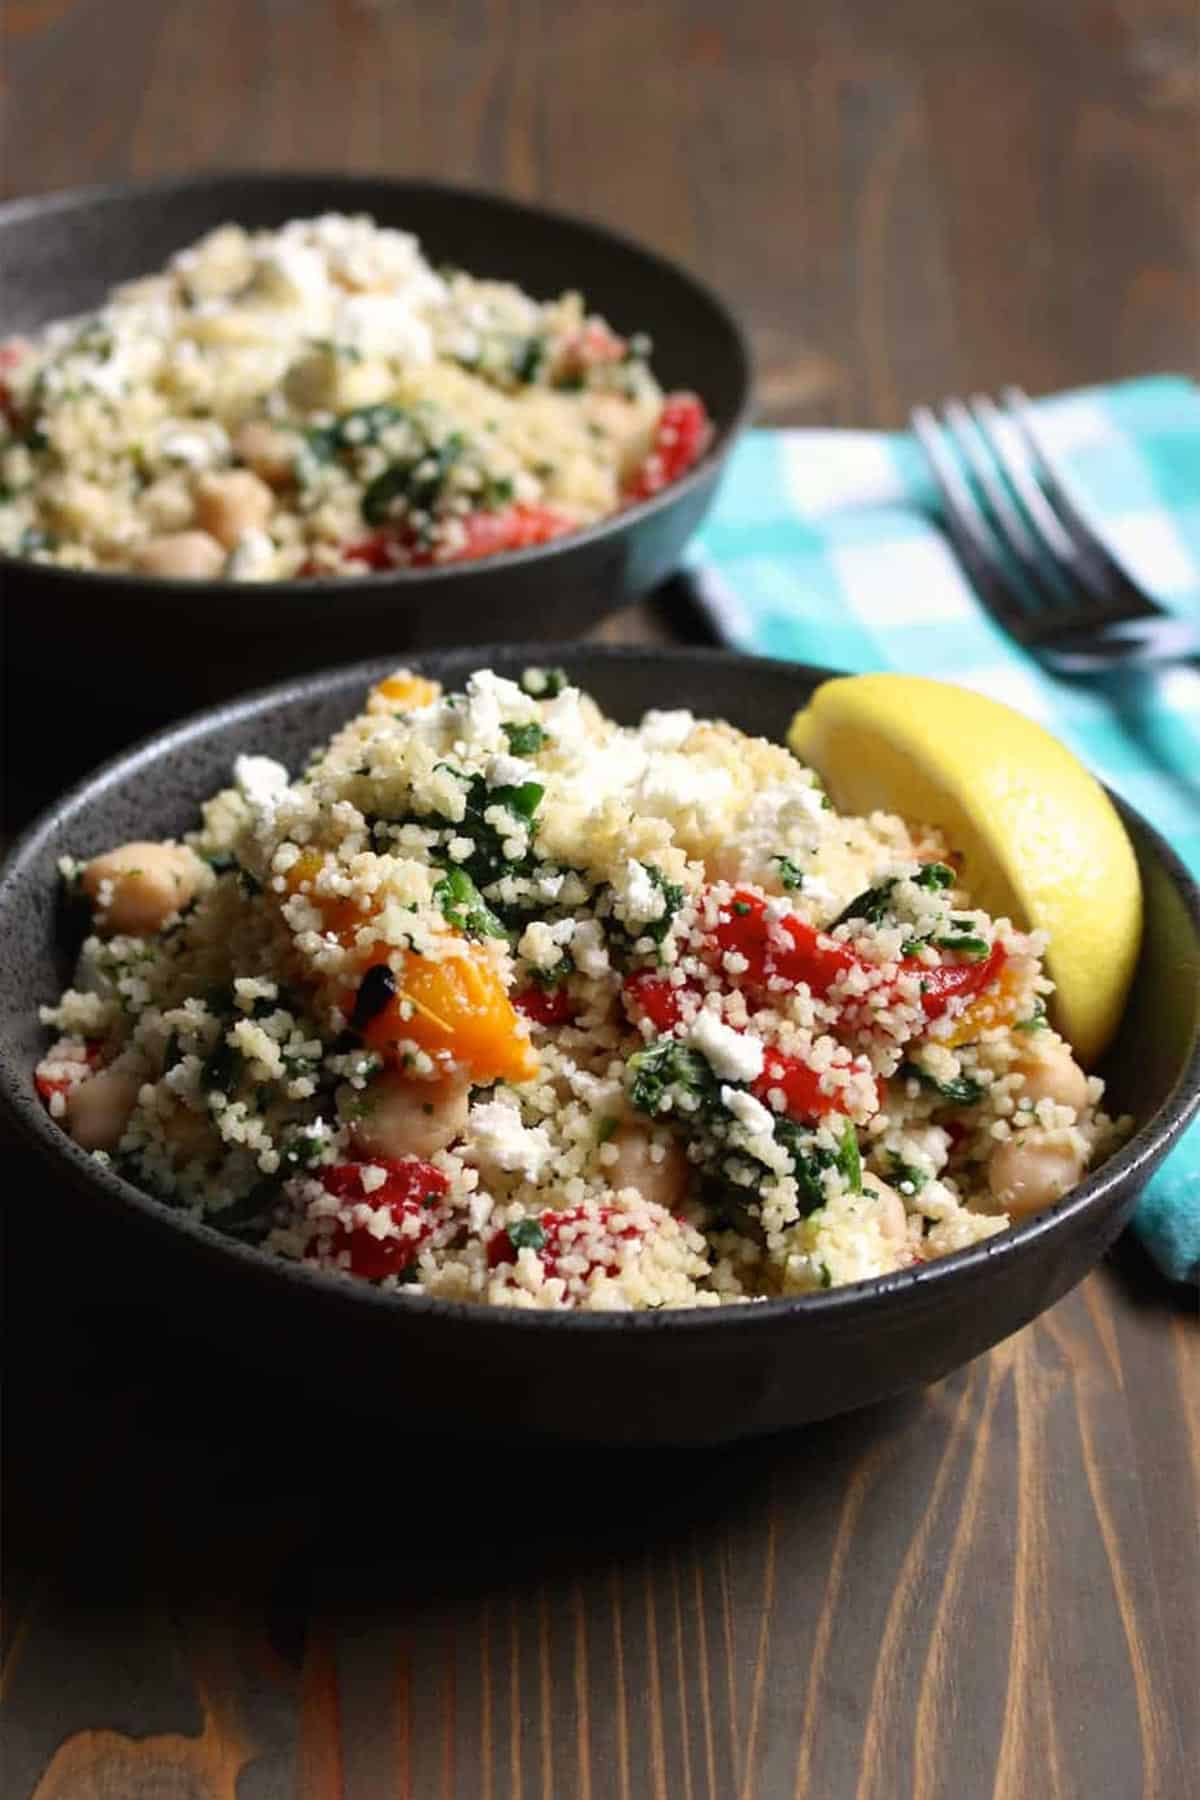 Two bowls of spinach couscous on a table ready to eat.